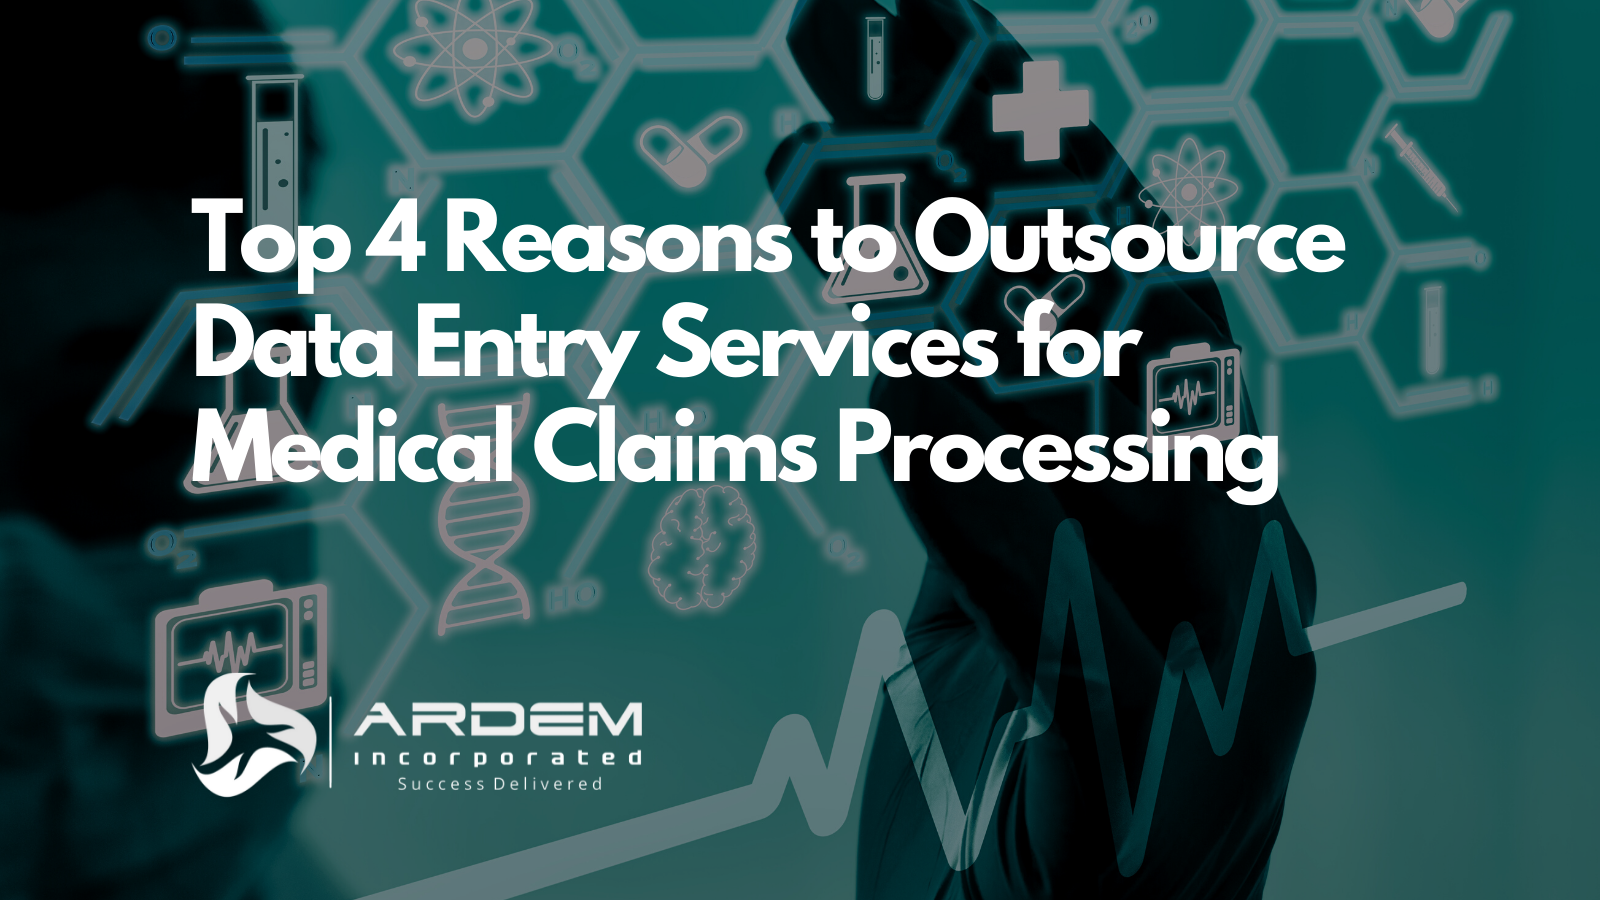 Data Entry Services for Medical Claims Processing